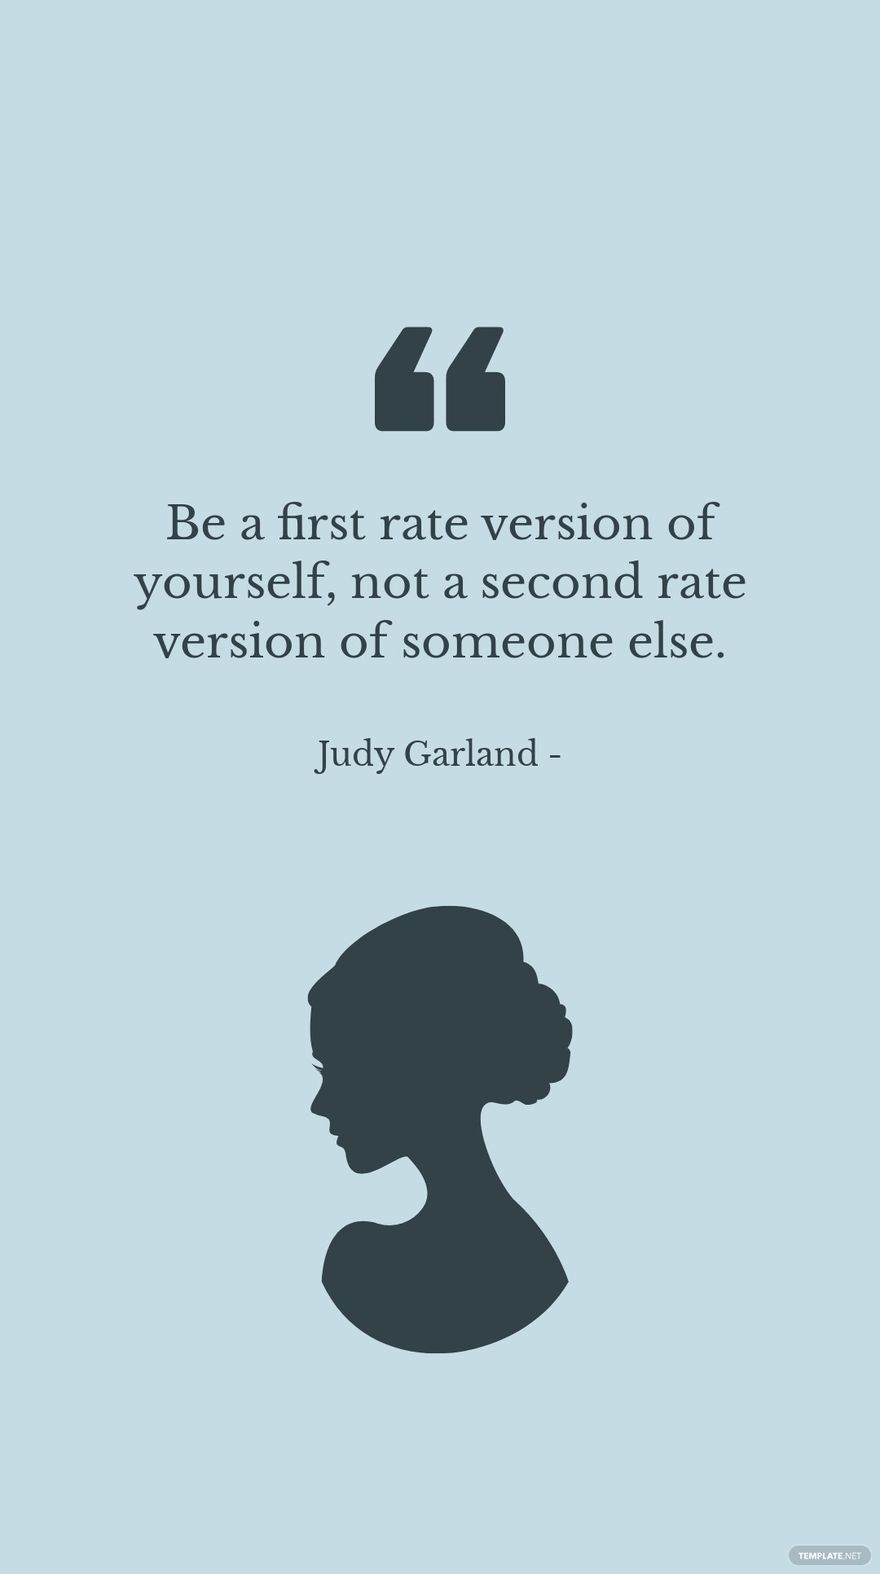 Free Judy Garland - Be a first rate version of yourself, not a second rate version of someone else. in JPG